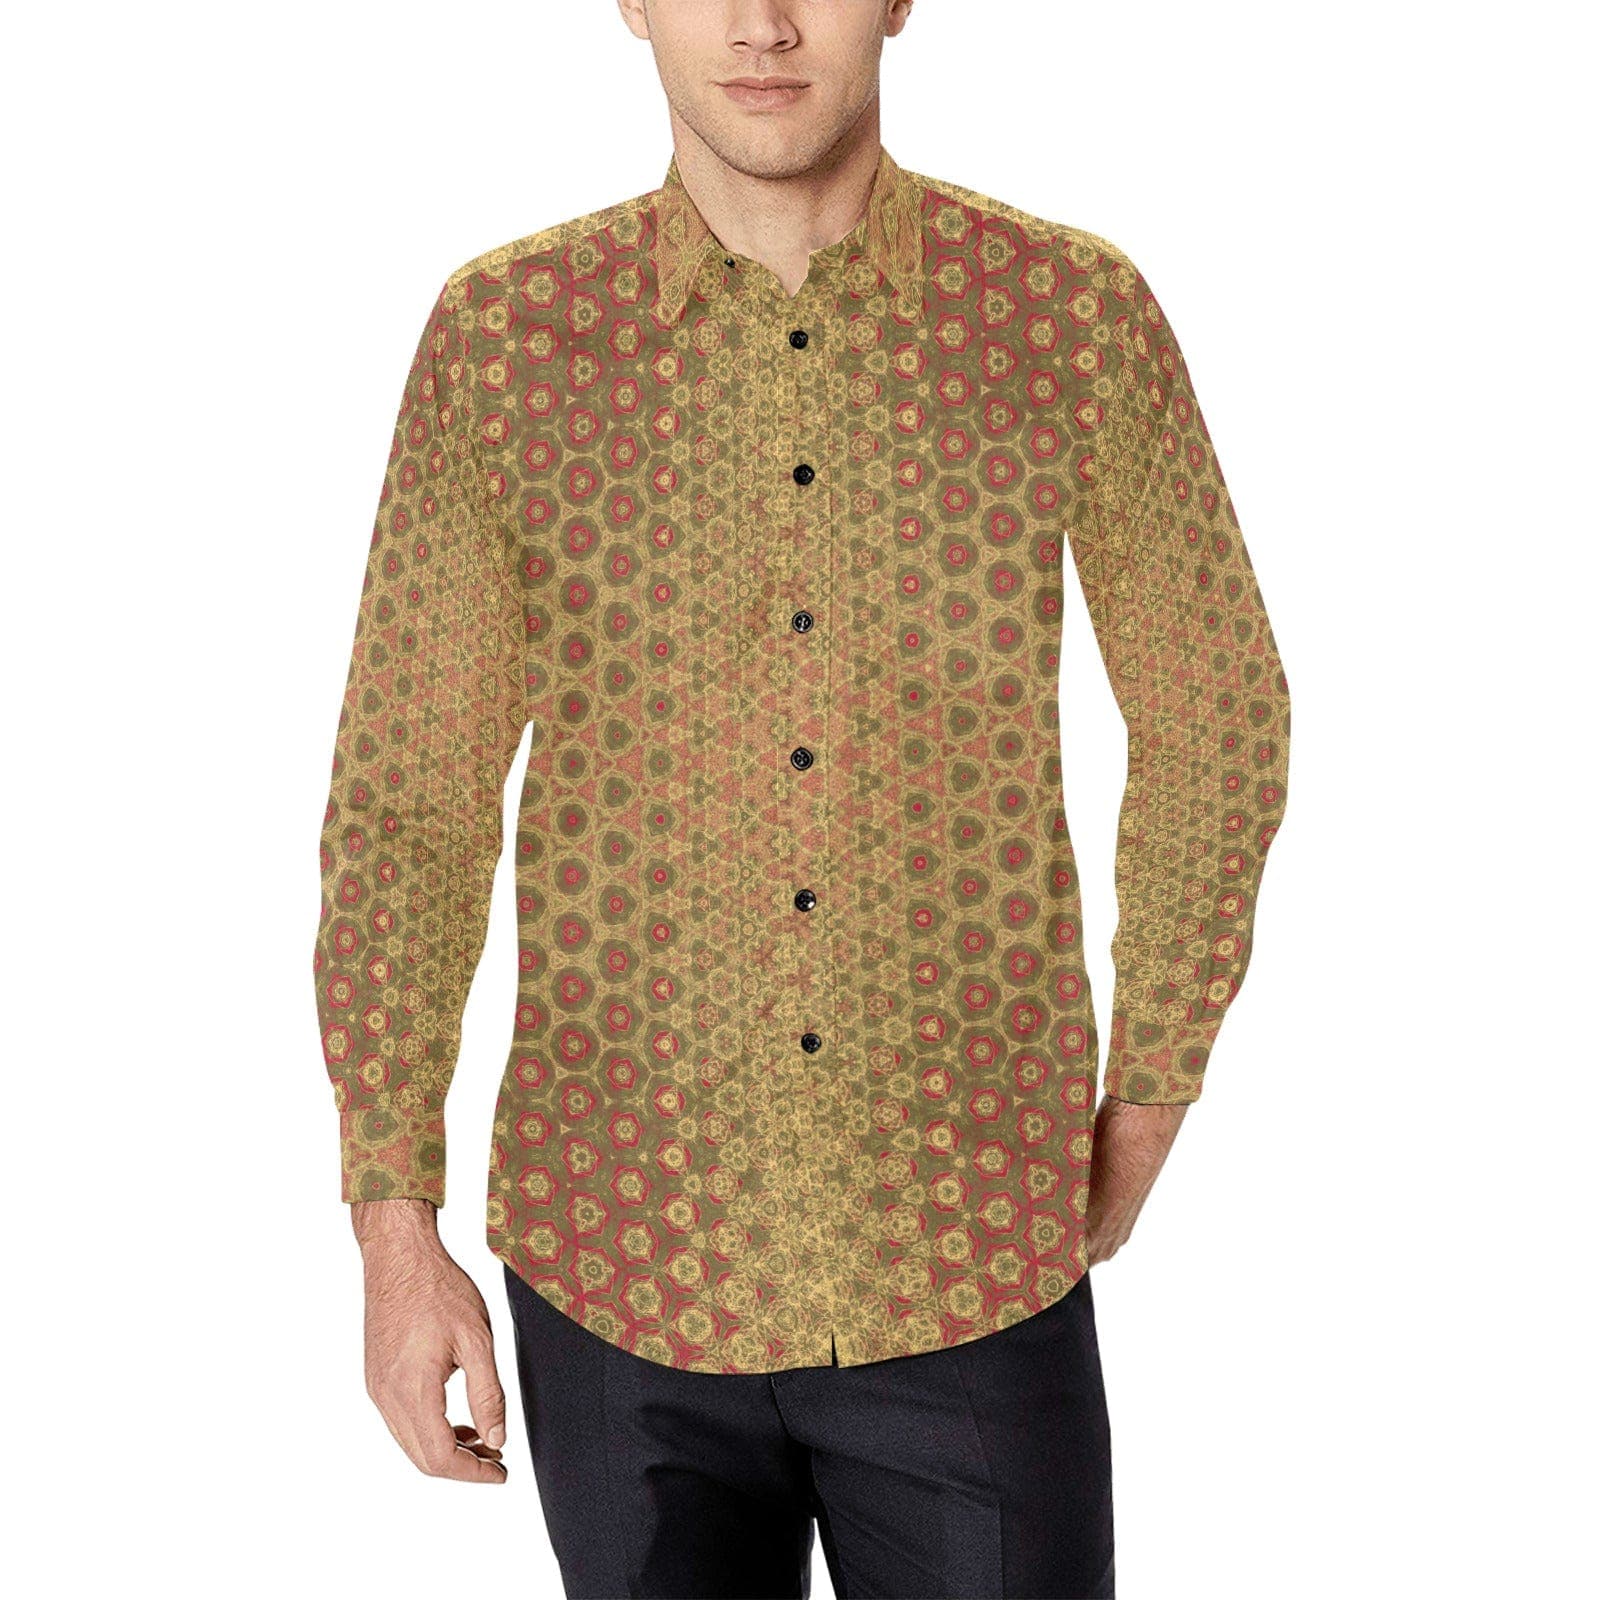 Summernight City Orange with Green Fantasy Patterned Party Shirt for Men Long Sleeve Shirt (Without Pocket)